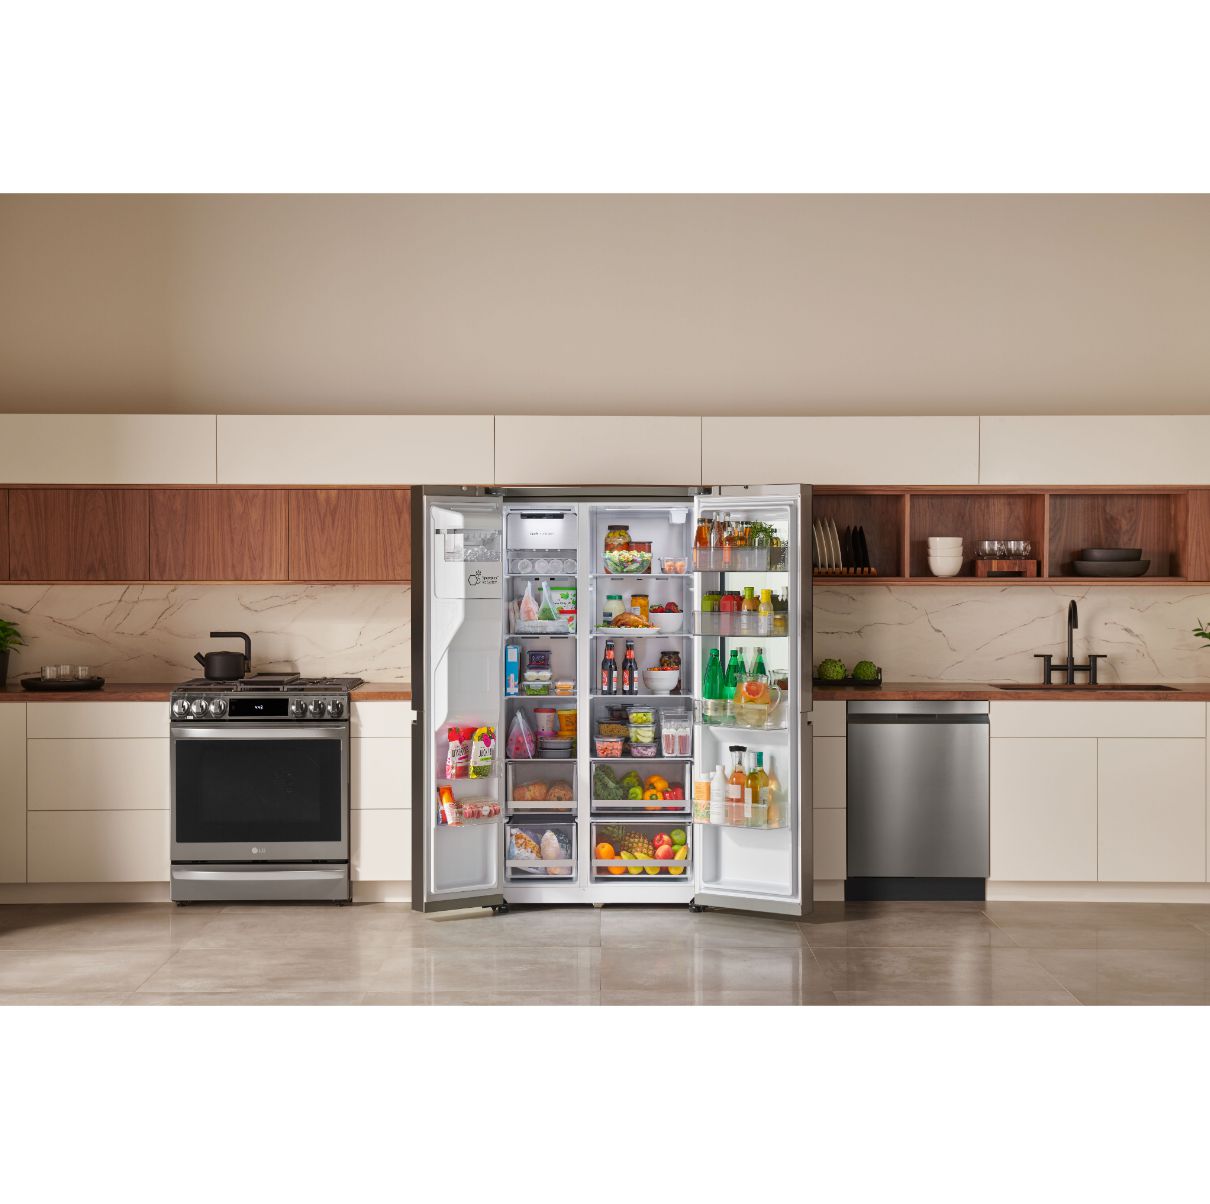 LG 36 Inch Side-by-Side Counter-Depth InstaView Refrigerator with Craft Ice in Stainless Steel 23 Cu. Ft. (LRSOC2306S)